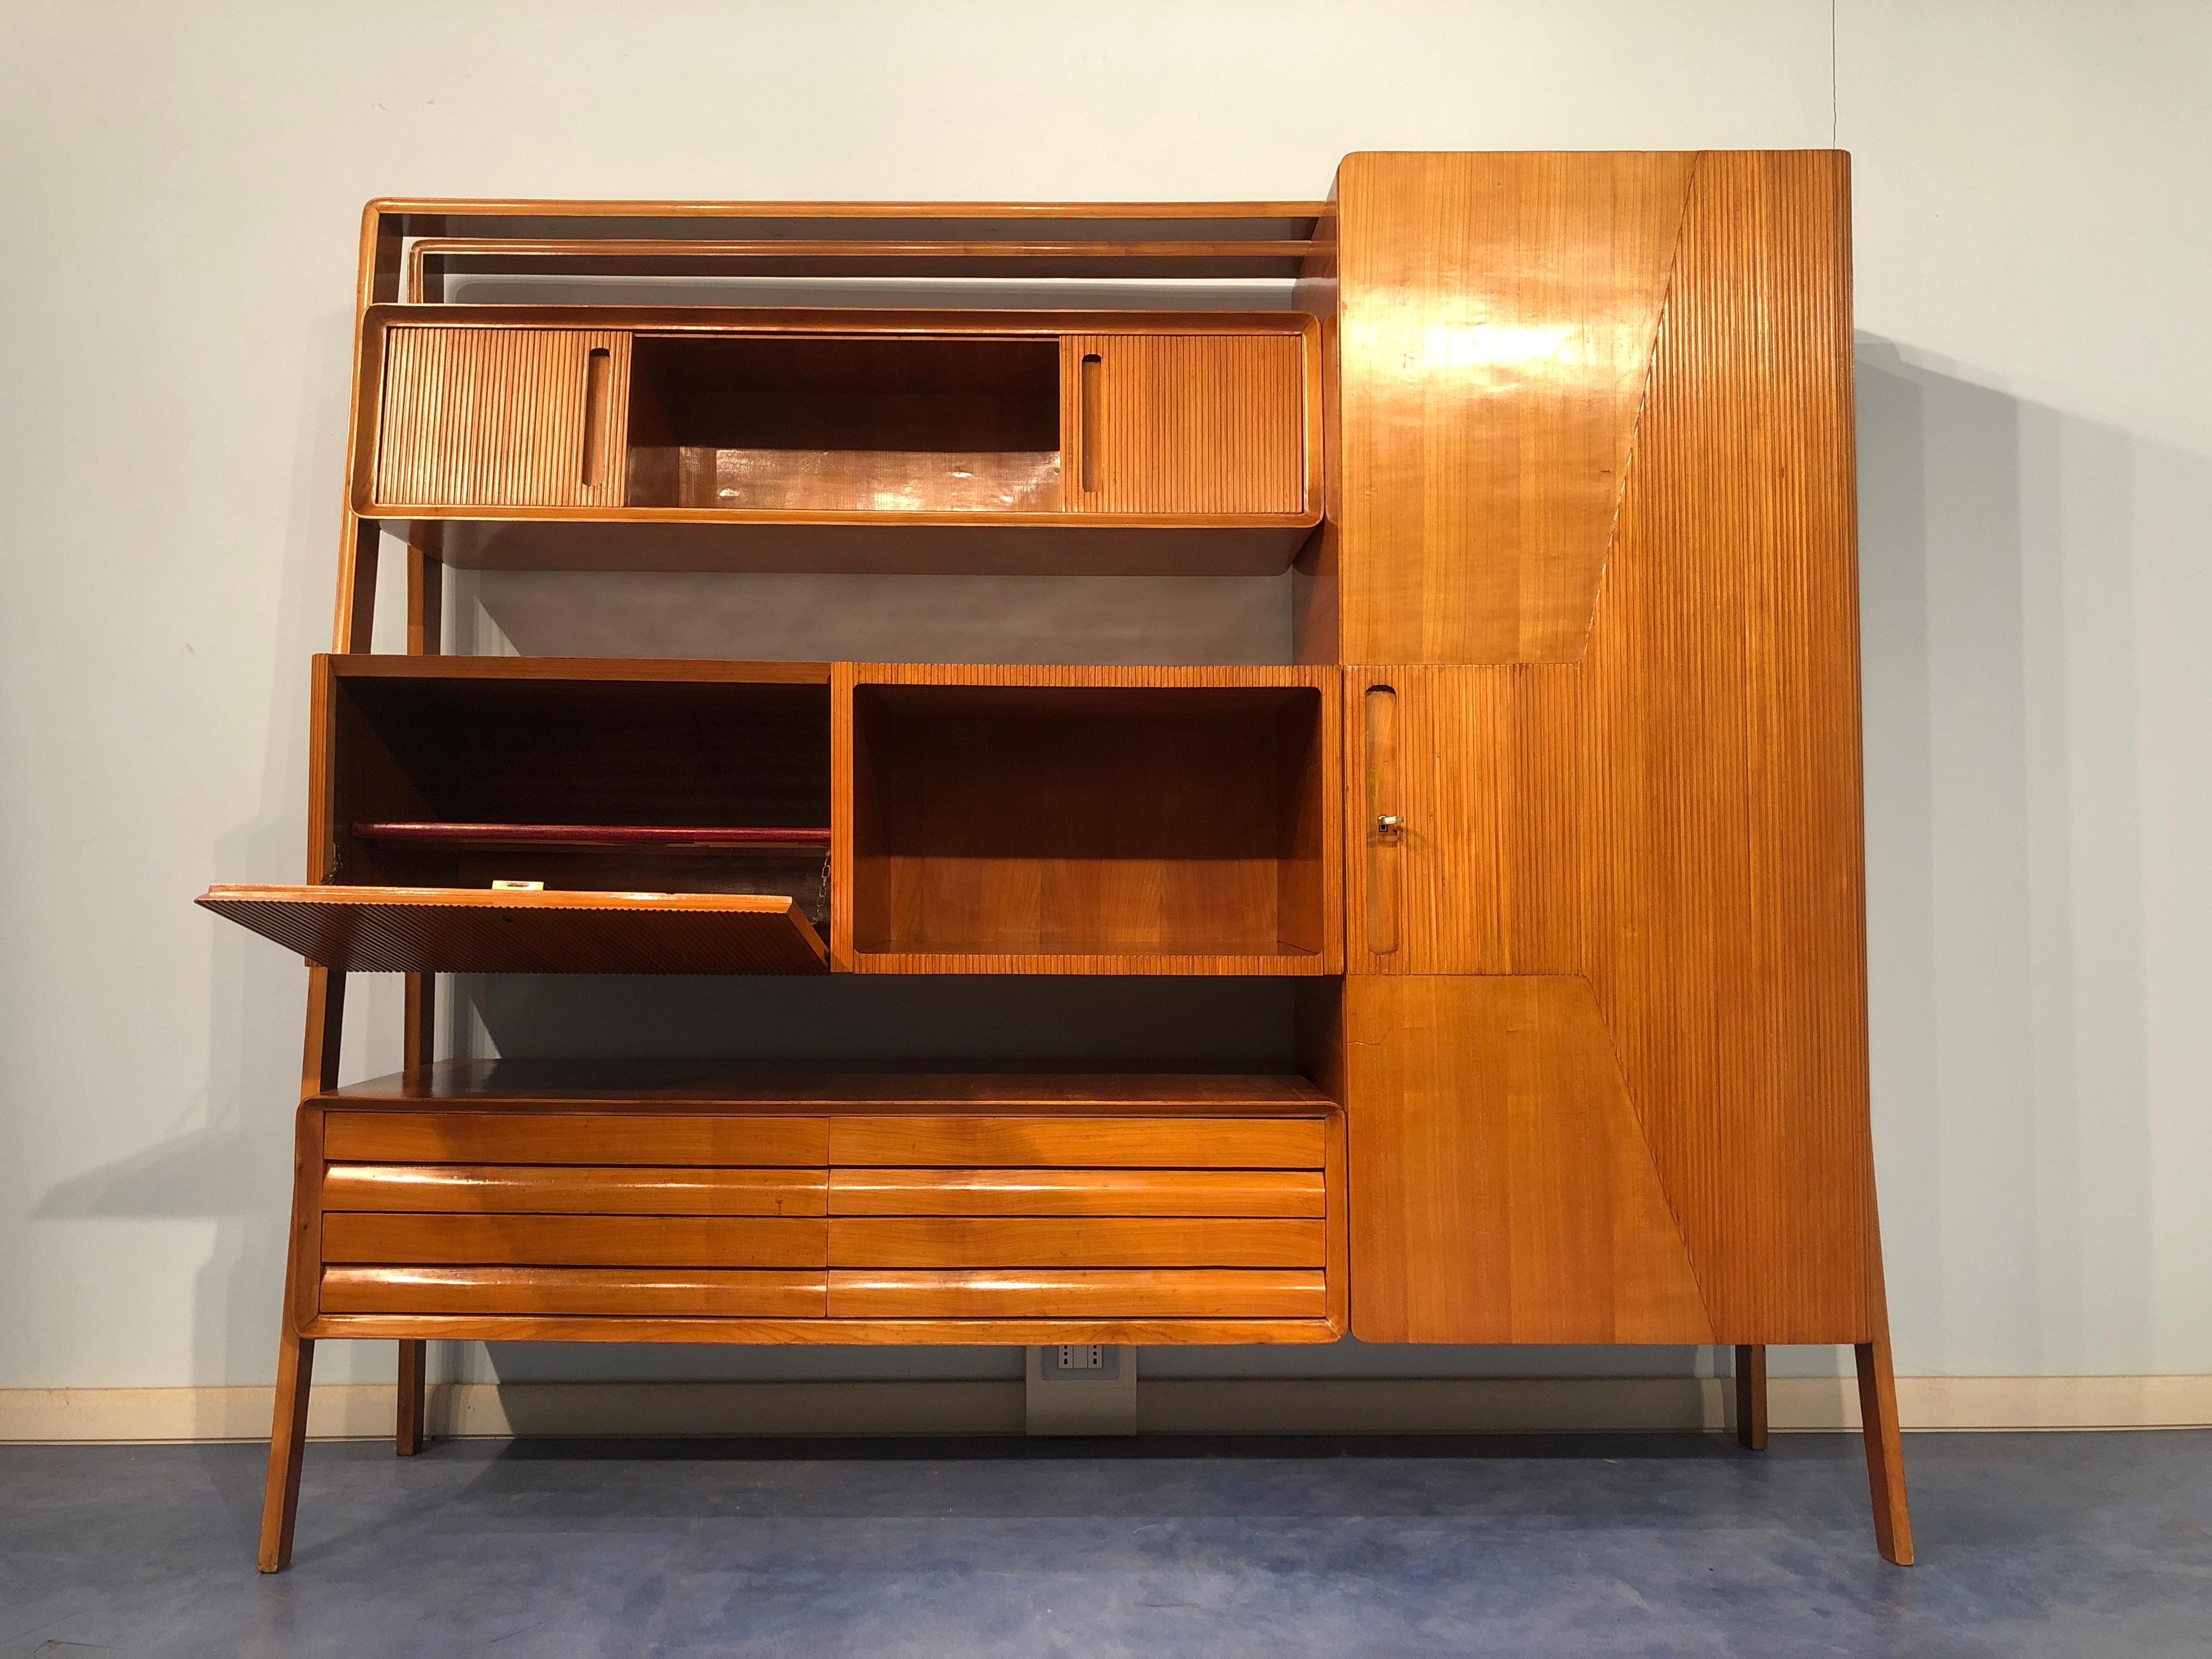 Italian sideboard in cherrywood by La Permanente Mobili di Cantù, 1950s.
Warmth and elegance are typically Italian.
A wonderful solution for side supports, with a refined line, 